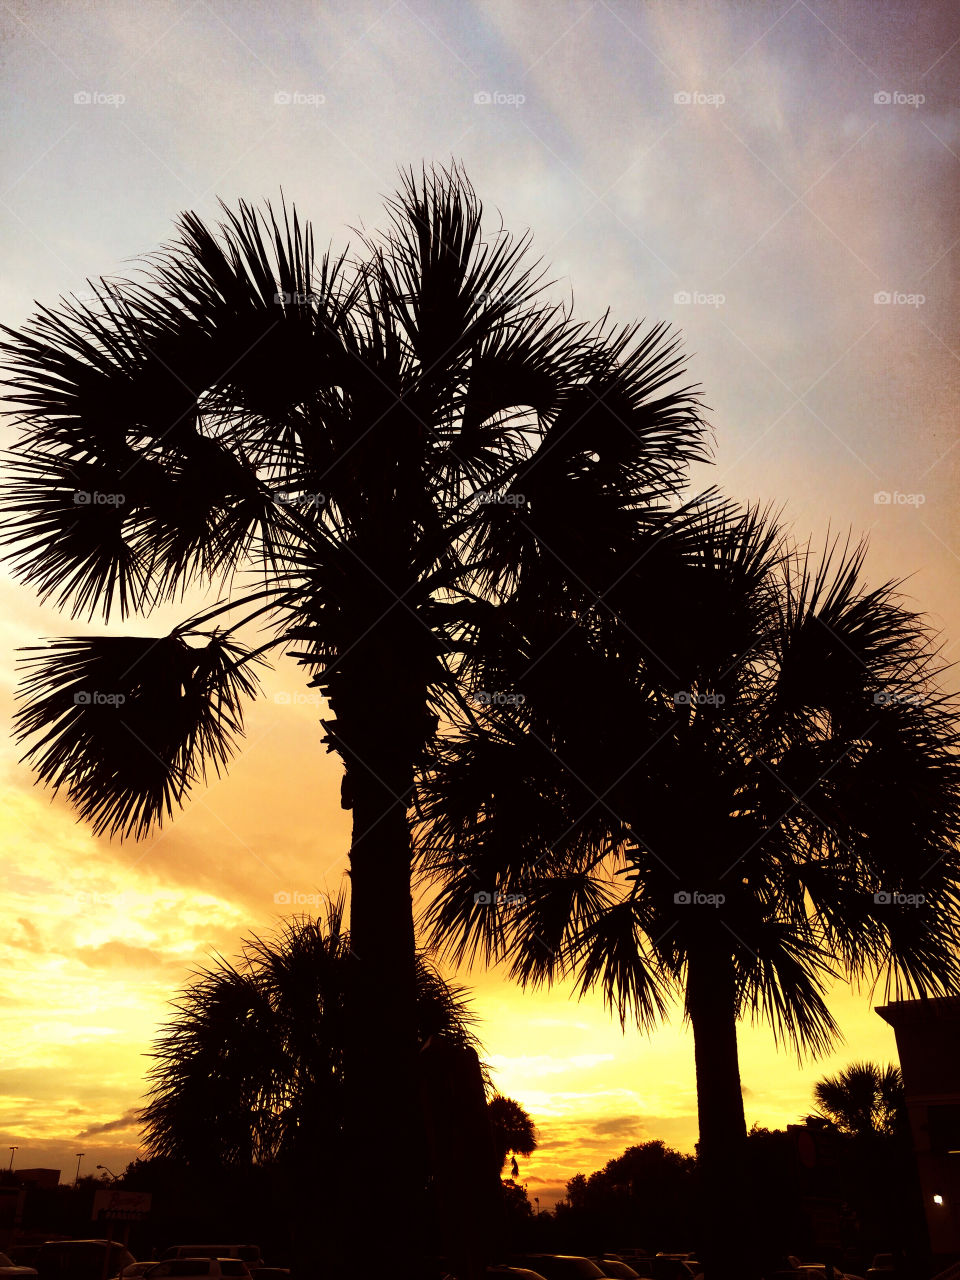 Palmetto tree silhouetted at sunset.